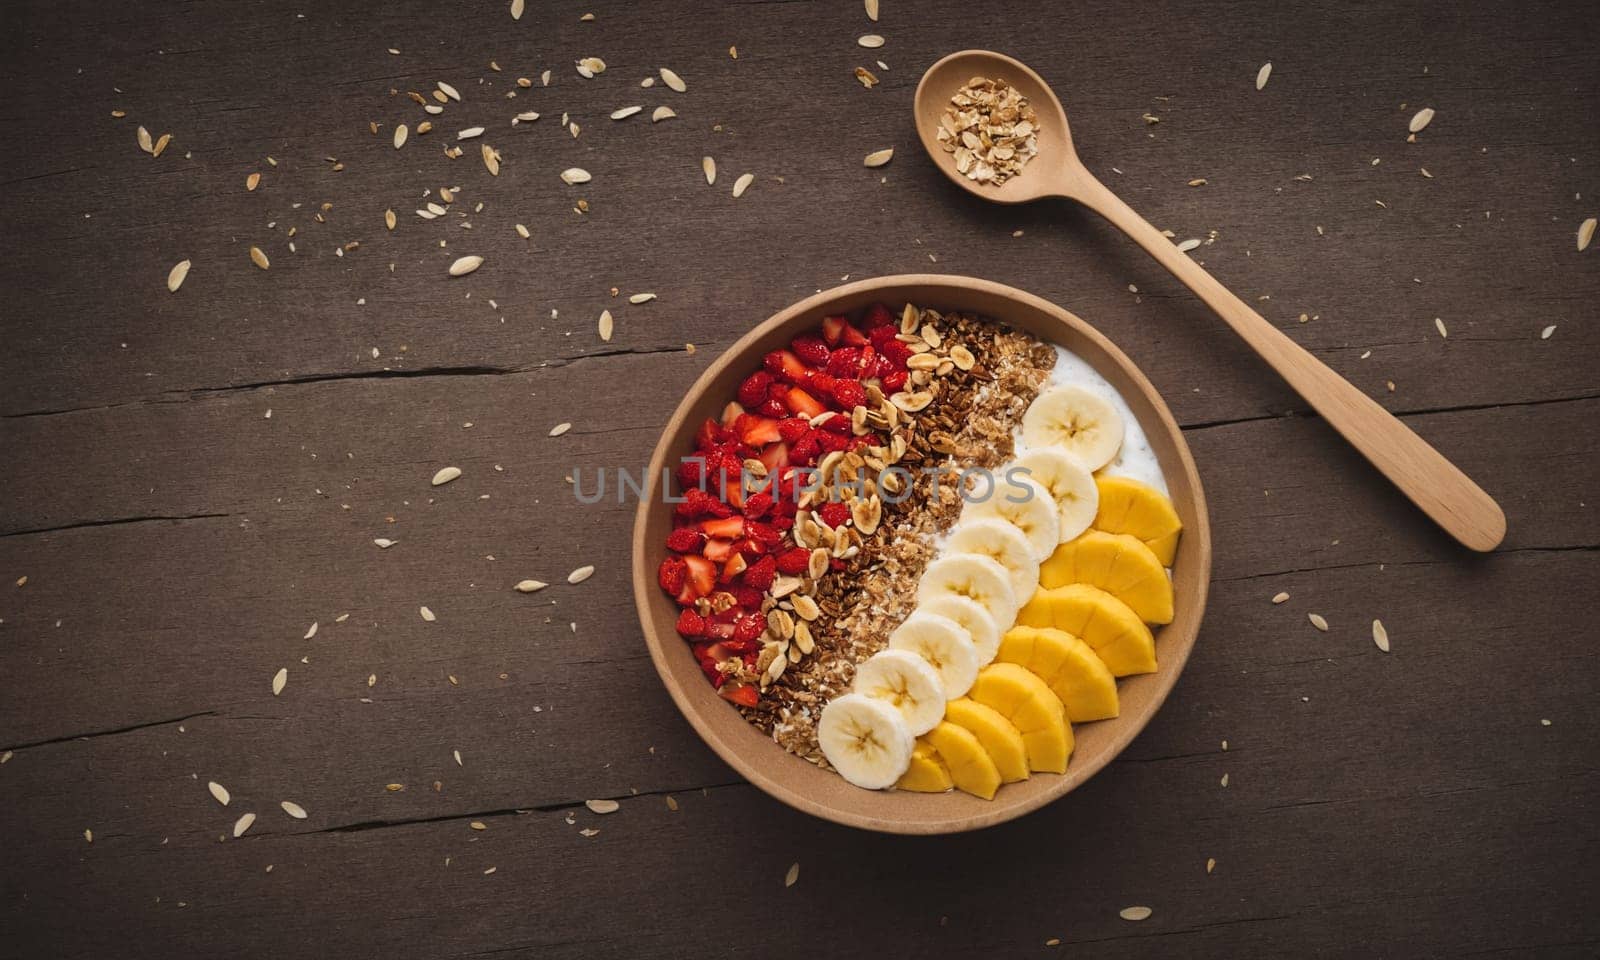 Nutritious Smoothie Bowl Delight by pippocarlot